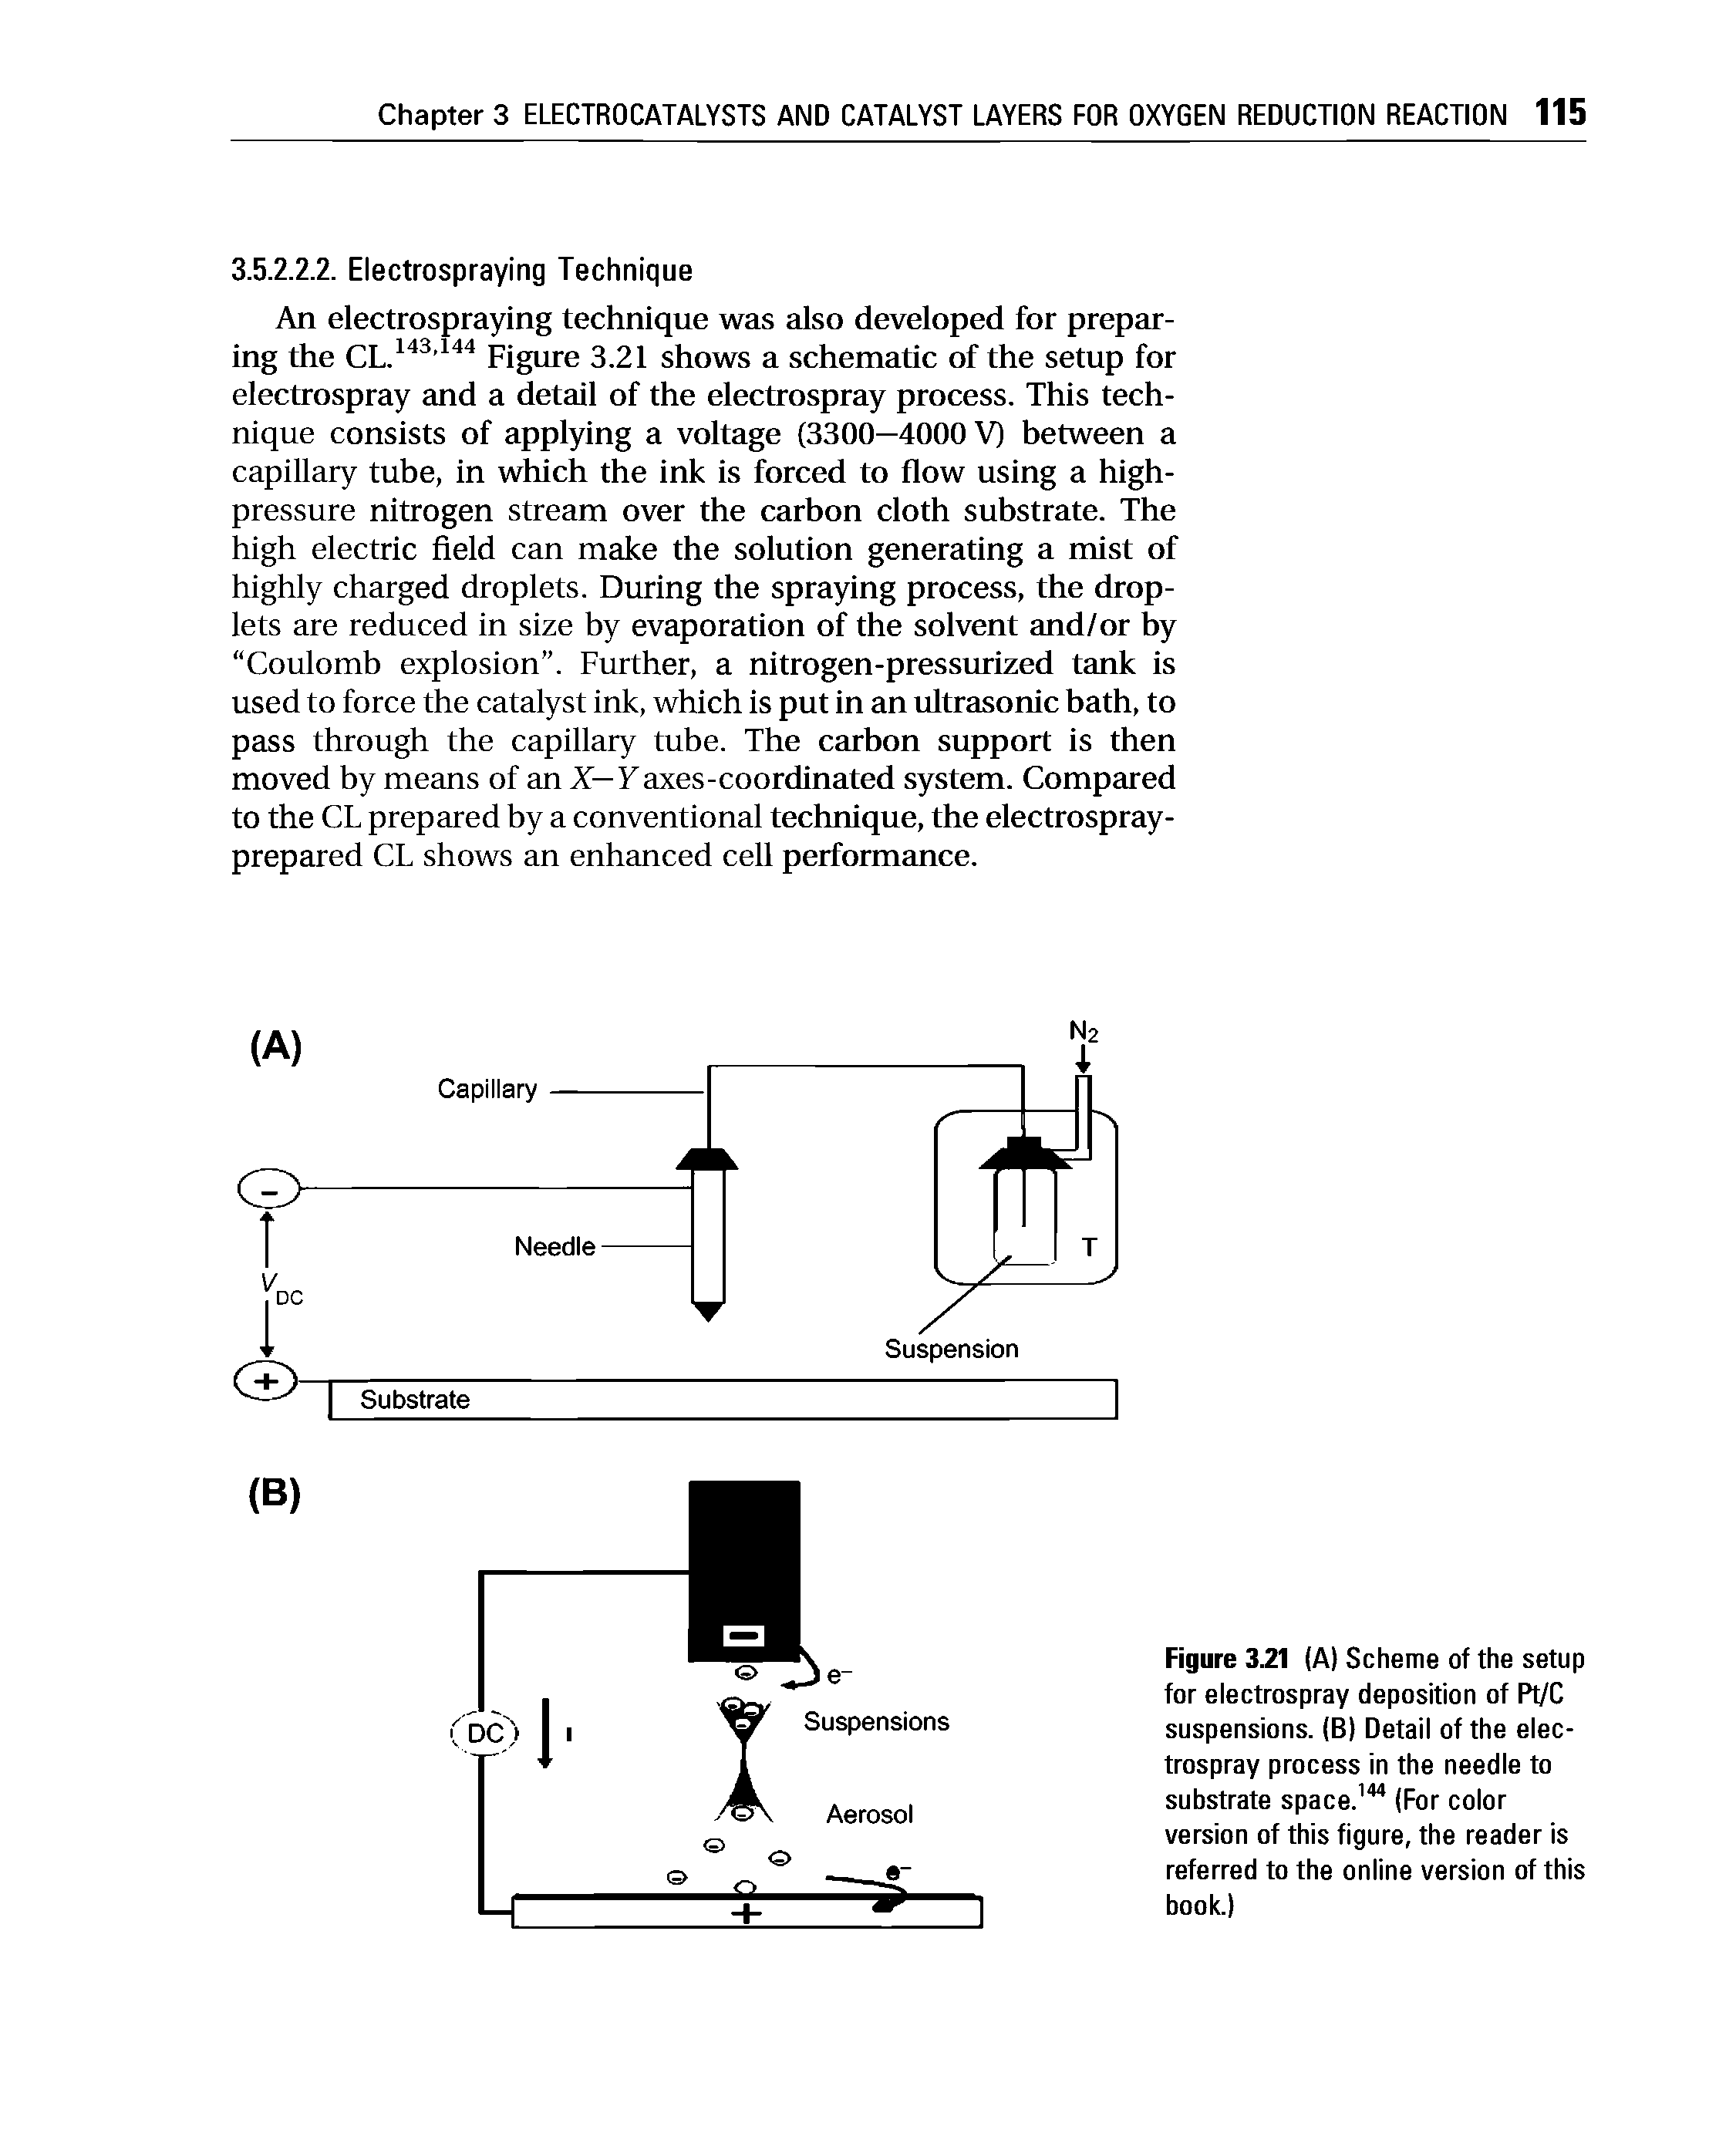 Figure 321 (A) Scheme of the setup for electrospray deposition of Pt/C suspensions. (B) Detail of the electrospray process in the needle to substrate space. (For color version of this figure, the reader is referred to the online version of this book.)...